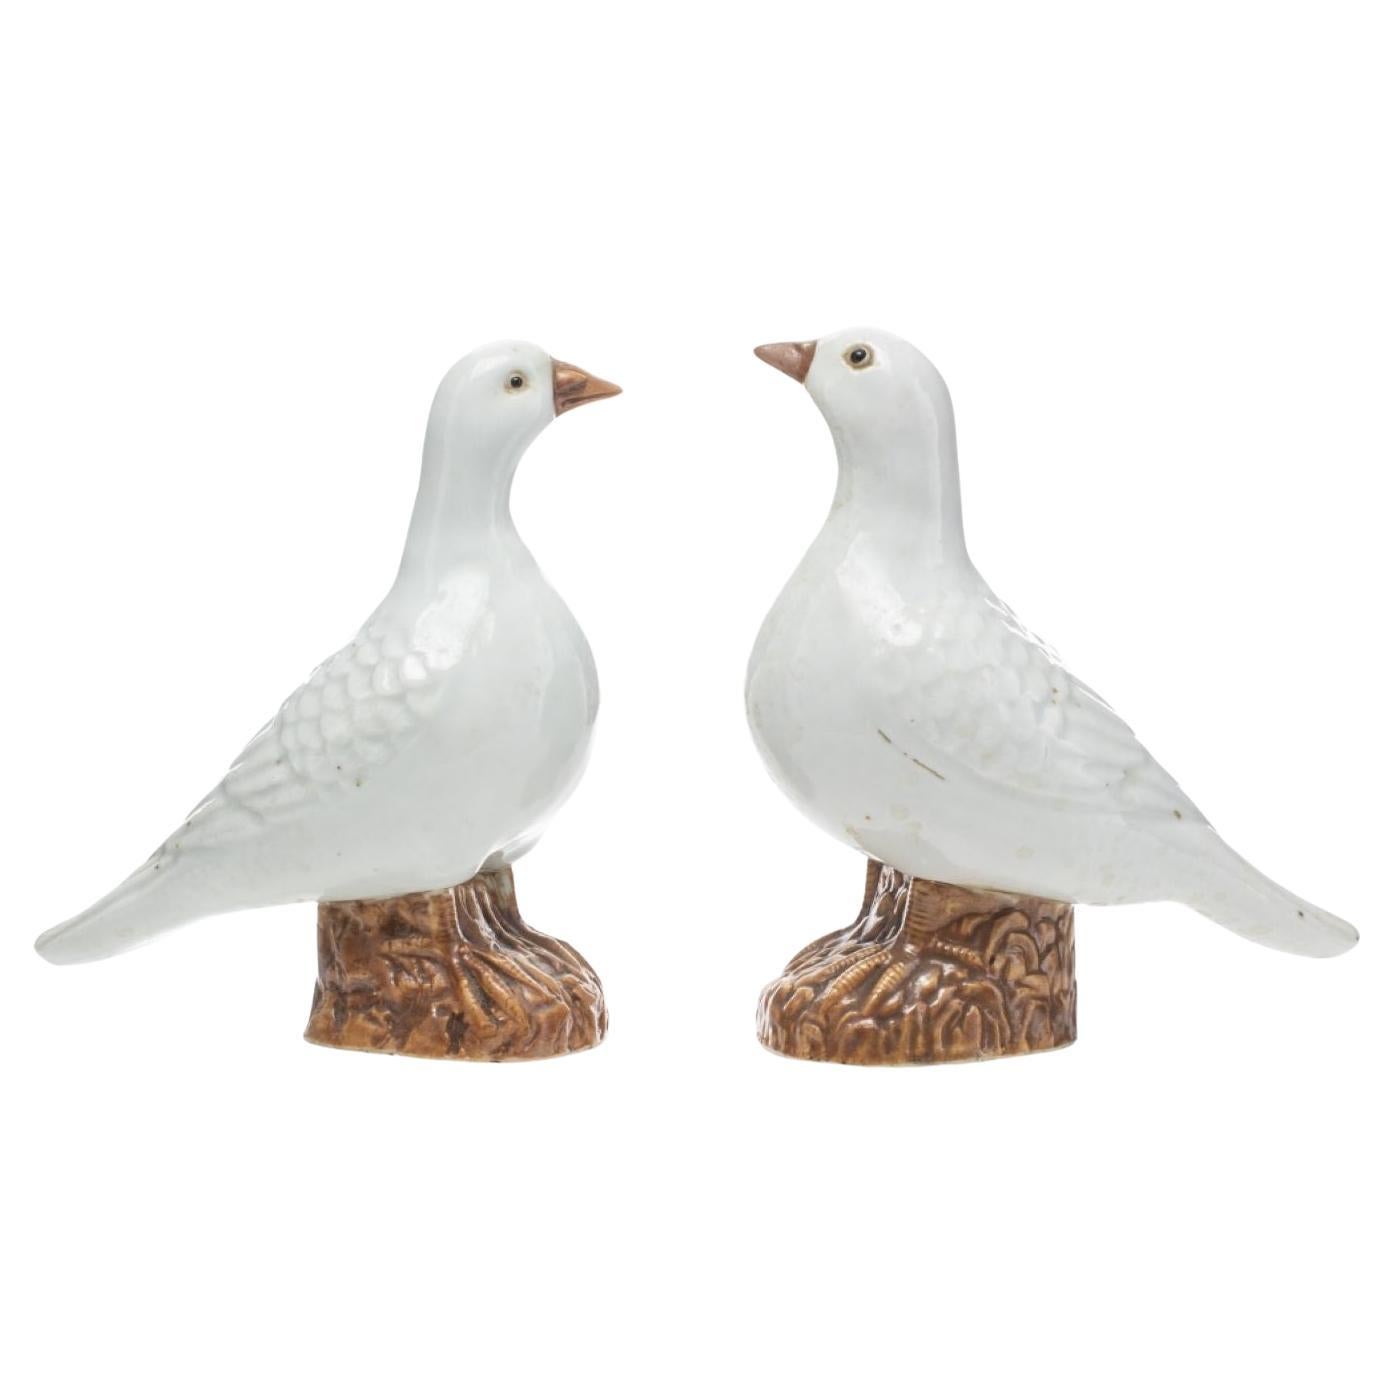 Chinese Export White Porcelain Birds, Pair